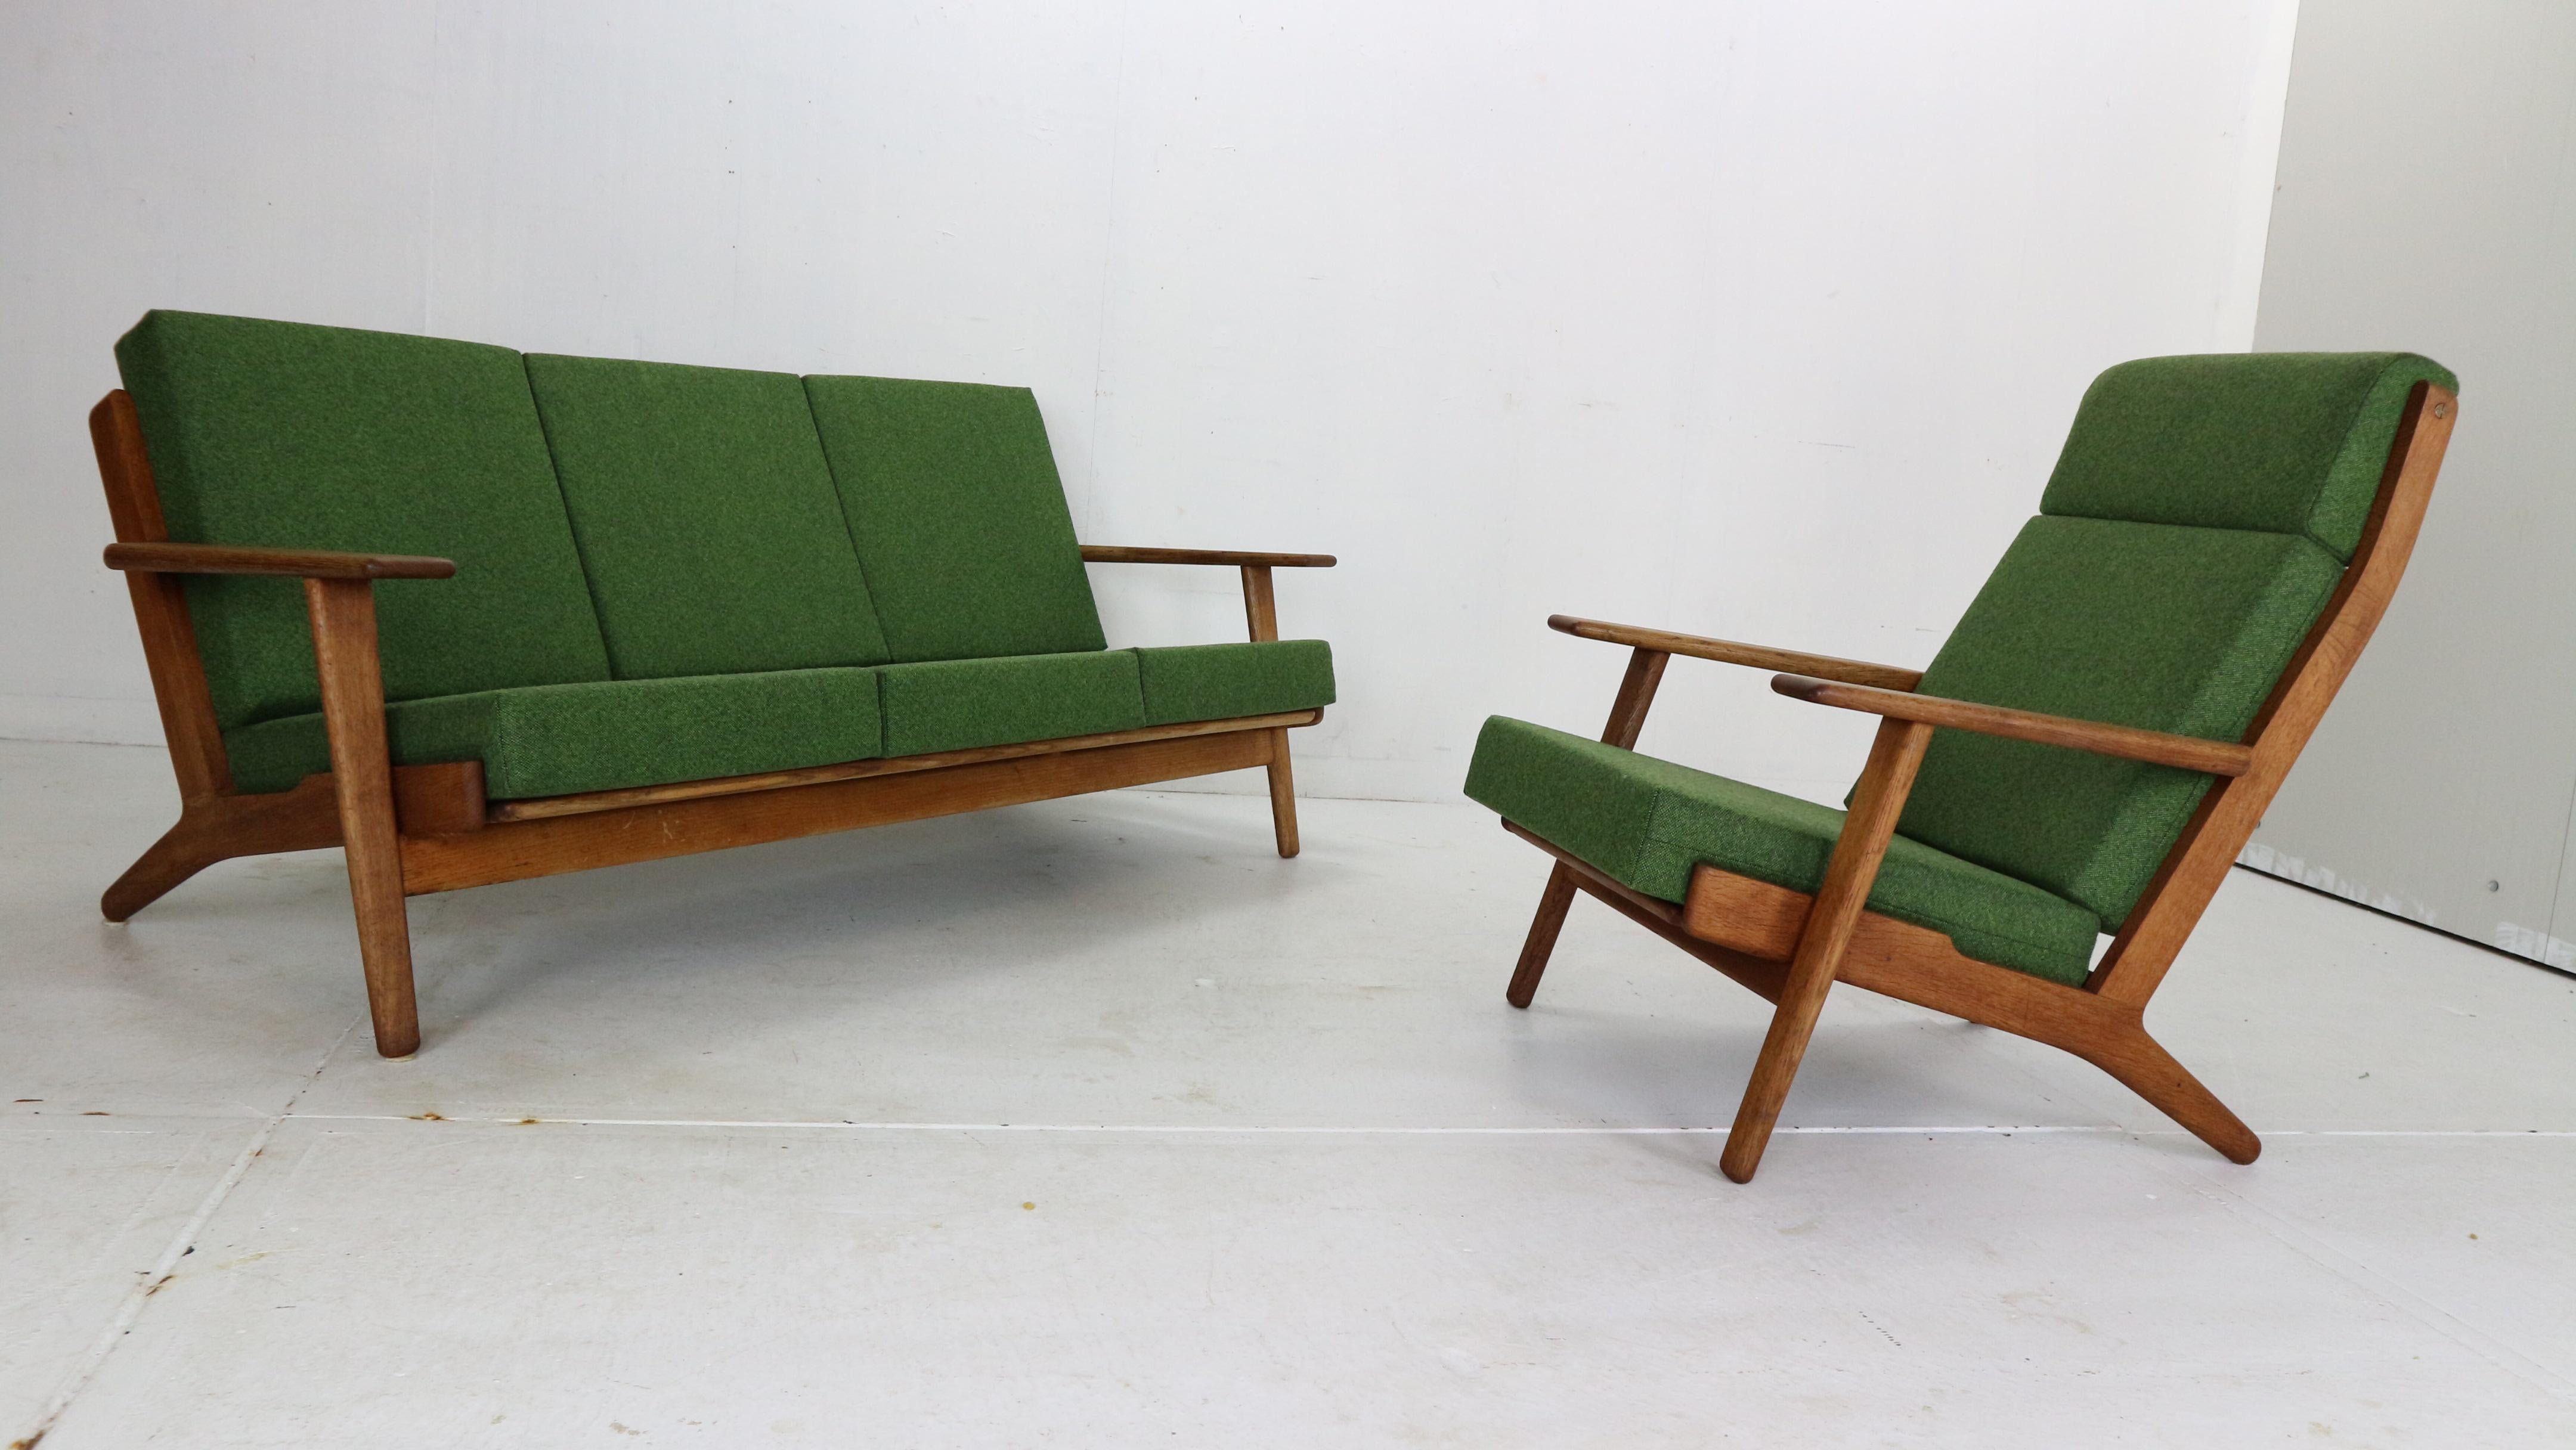 Scandinavian Modern living room set ( 3-seater sofa& lounge chair) both designed by Hans J. Wegner and manufactured by GETAMA in 1960's period, Denmark.

Solid oak sofa with elegant curving details and strong wide armrests, high backrests creates